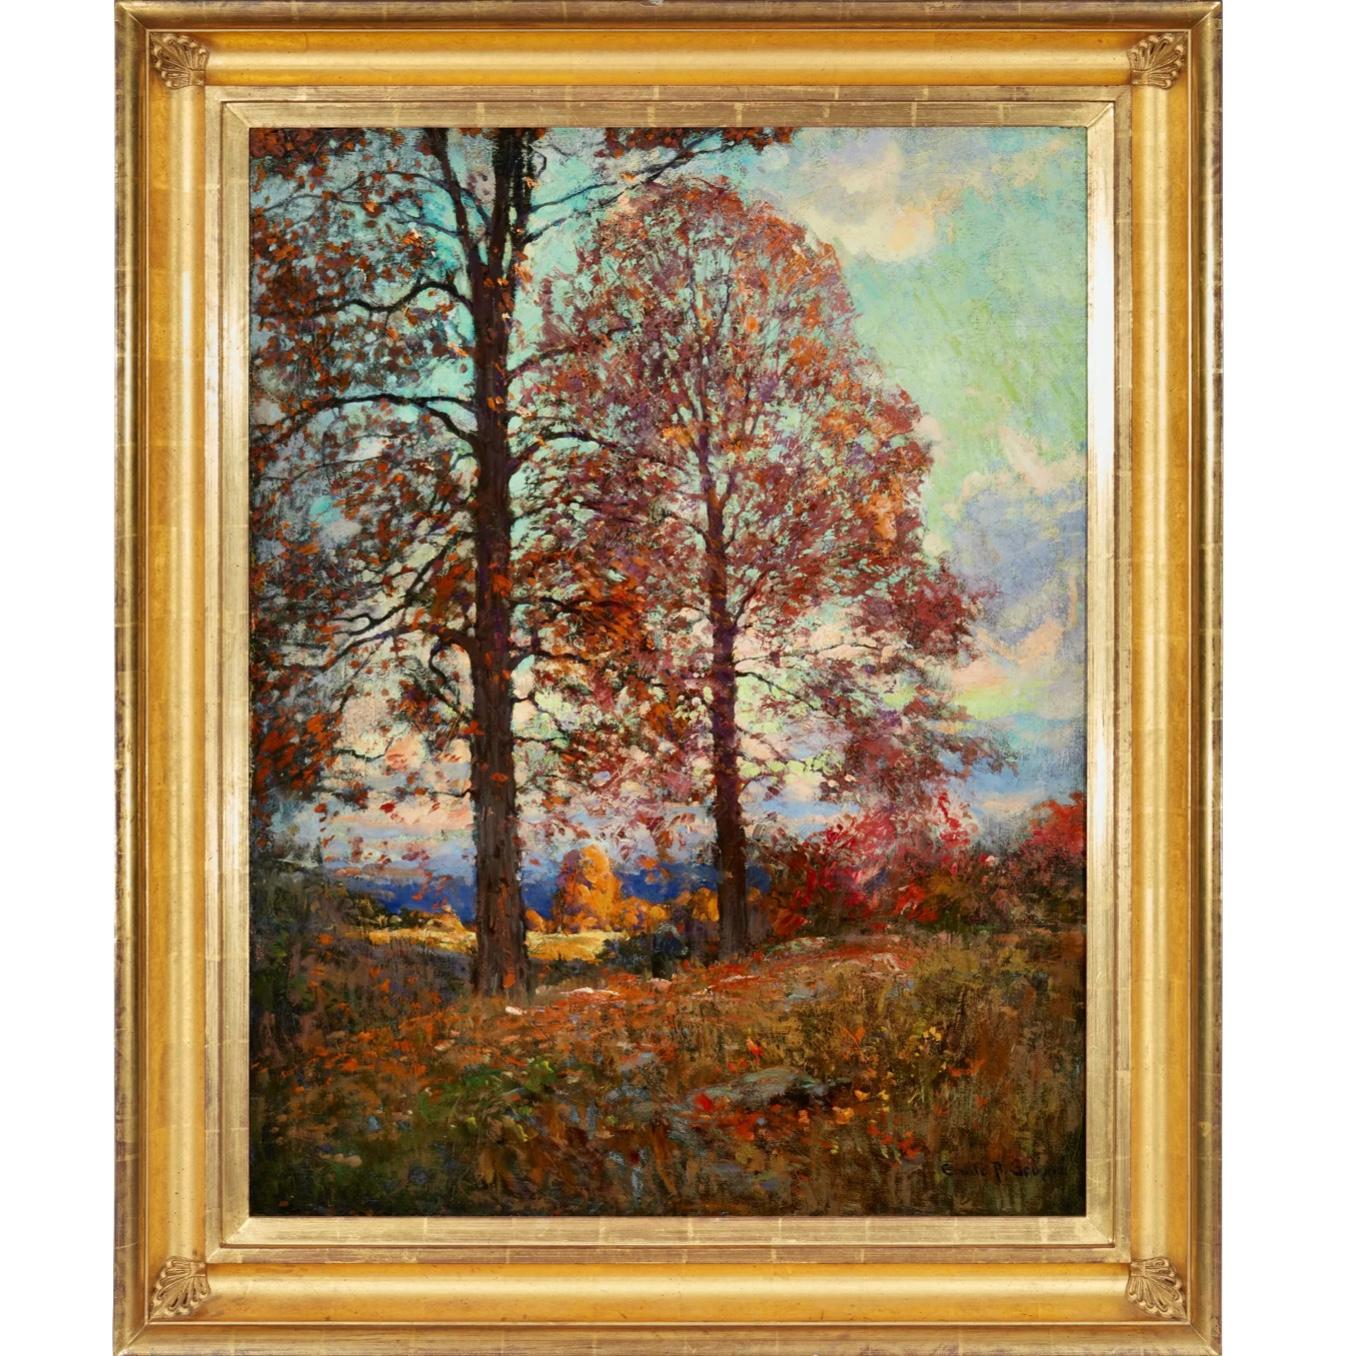 Emile Albert Gruppe (1896-1978)
Fall landscape
Oil on canvas laid to canvas
Signed lower right: Emile A. Gruppe
Canvas: 40" H x 30" W Inches
Framed: 48.25 x 38.25 Inches

Very large and important work paainted in Gruppe’s early formative years.